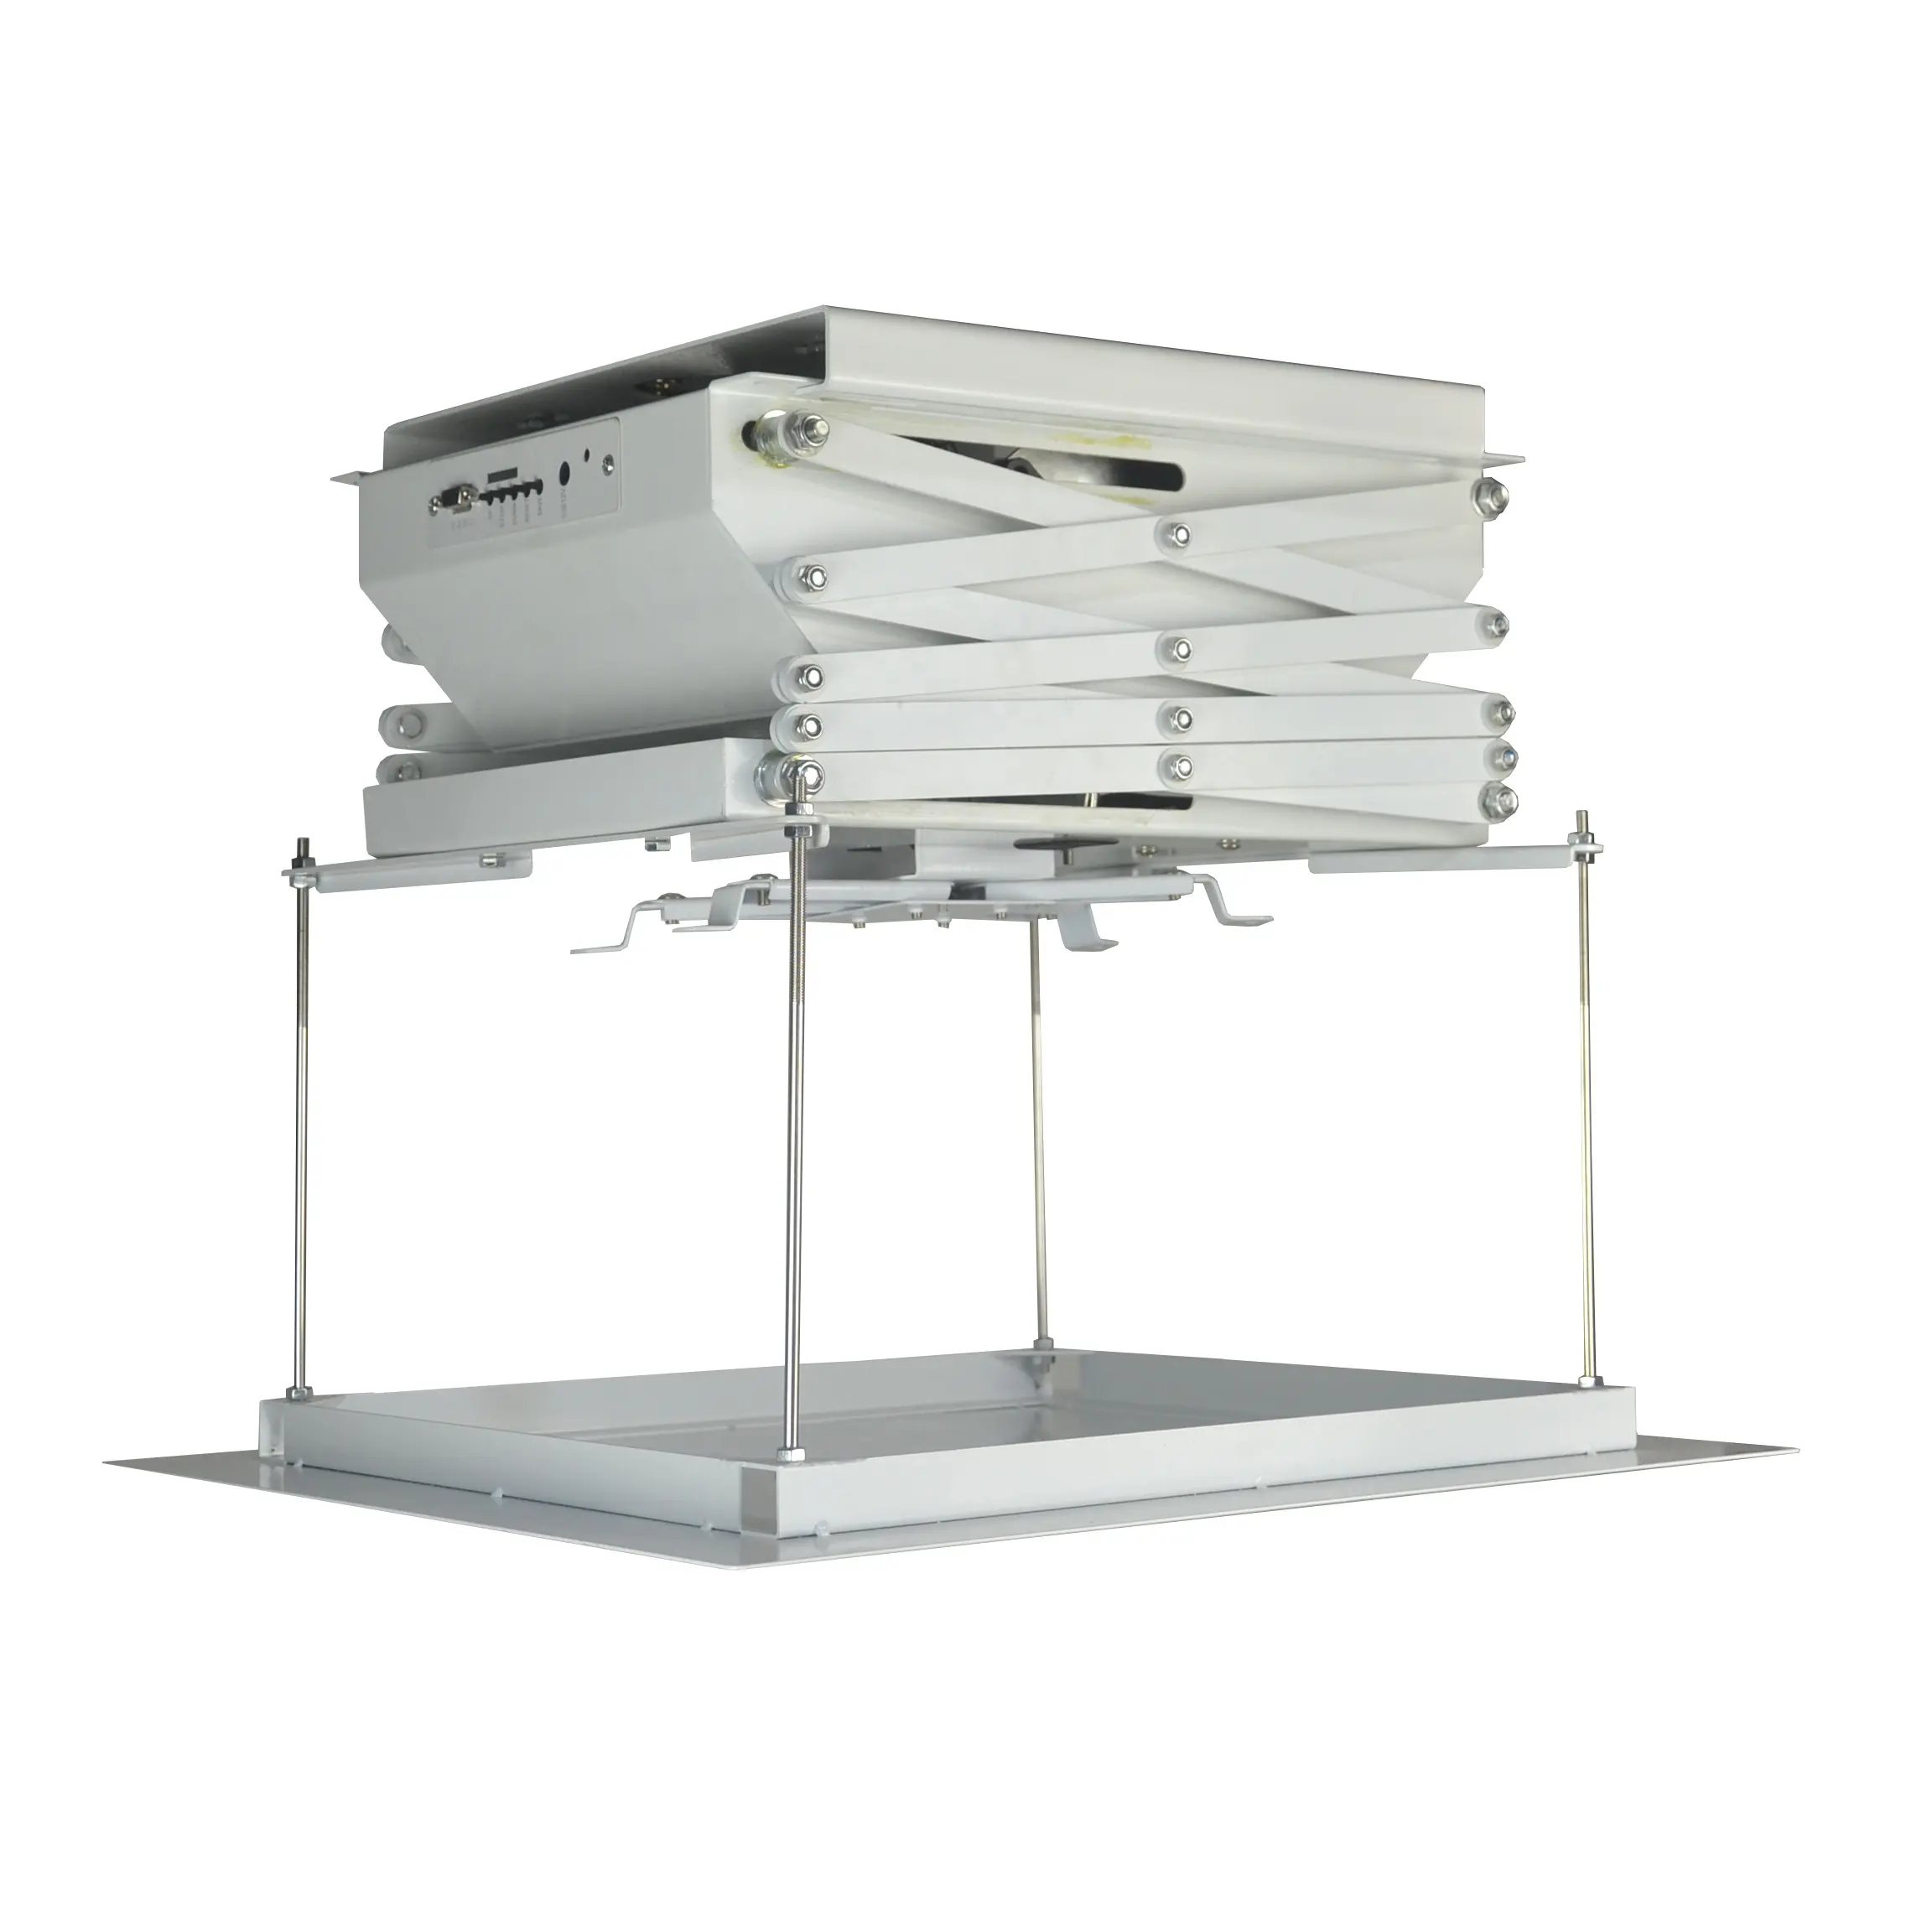 New design White Color 1 Meter Distance Motorized Projector Scissor Lift for Ceiling mounted